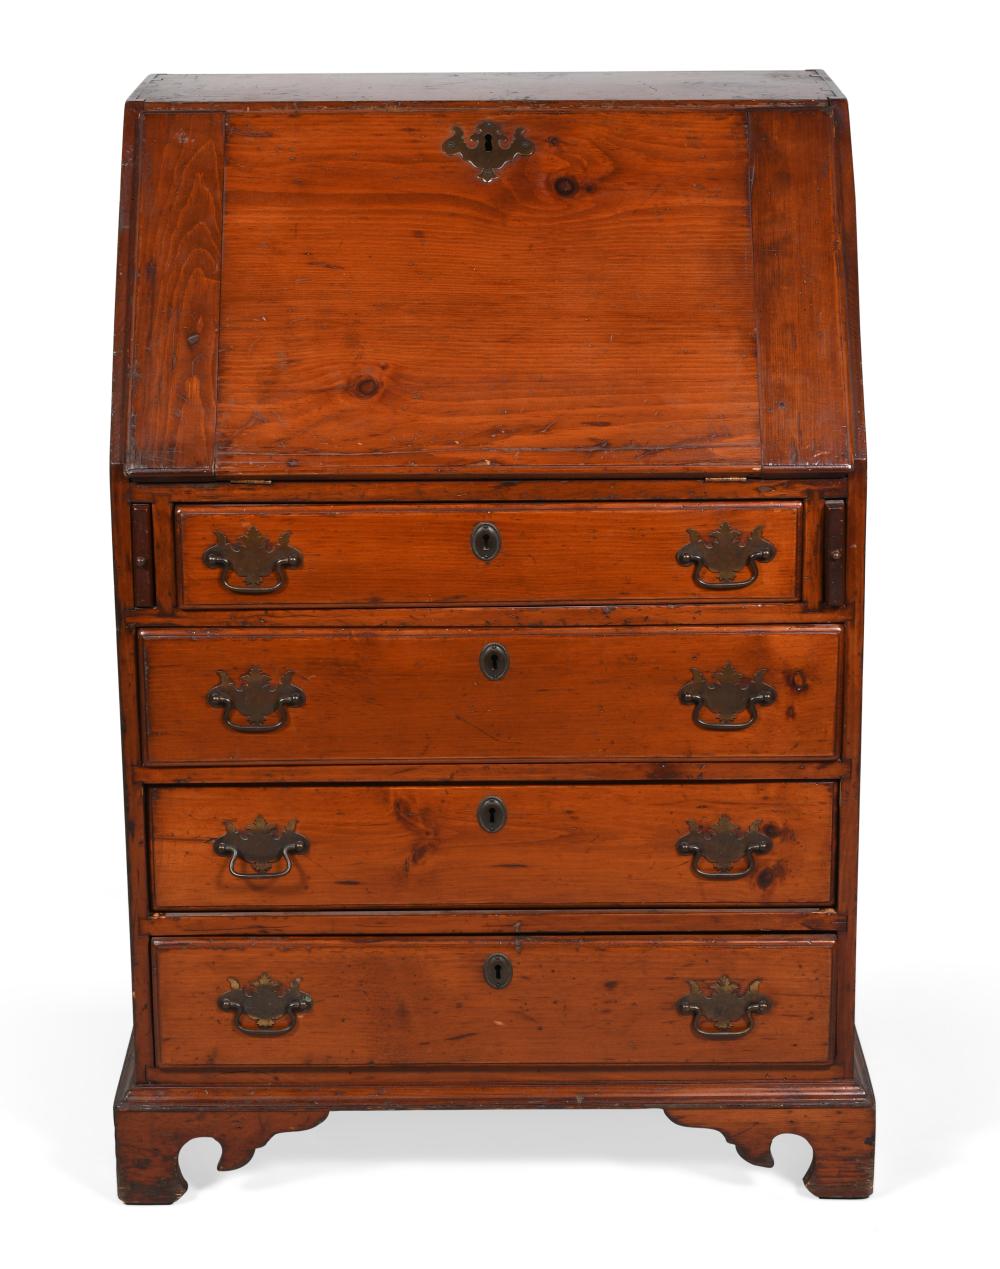 CHIPPENDALE STYLE PINE SLANT FRONT